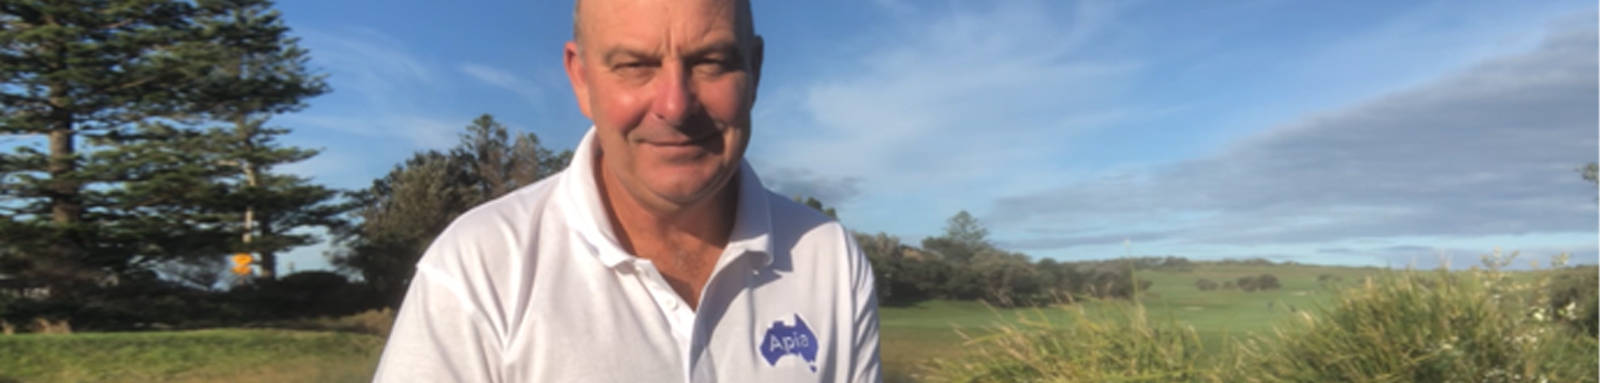 Apia Golf Banner with Andrew Daddo